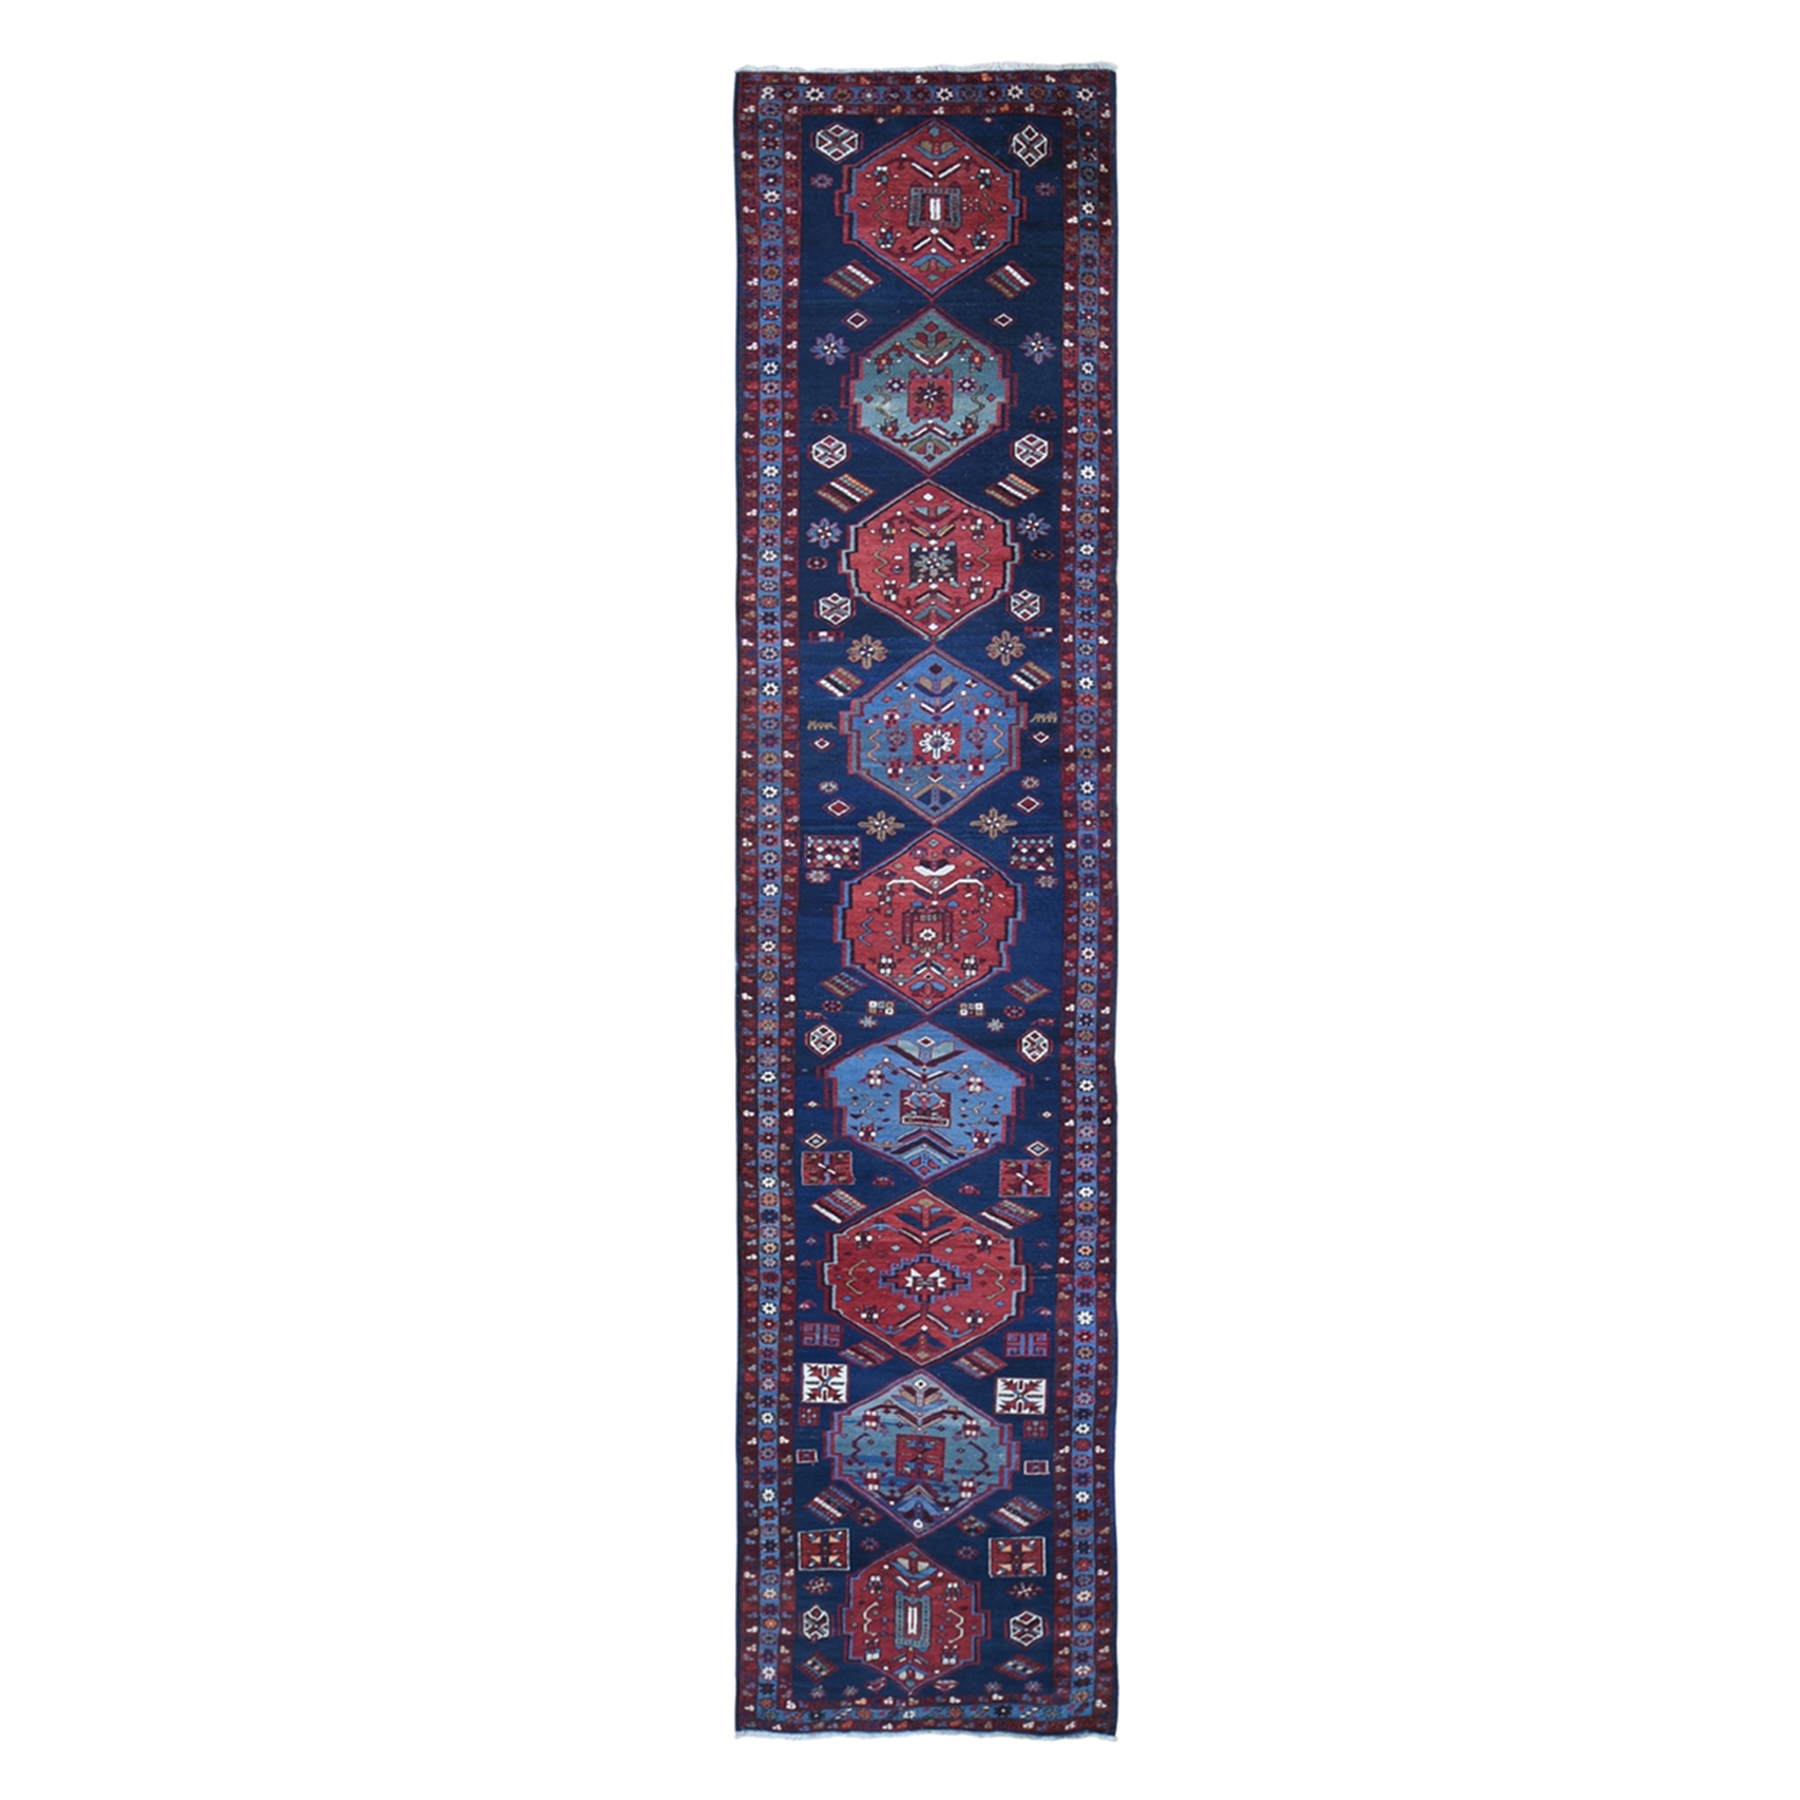 Antique Collection Hand Knotted Blue Rug No: 1132788